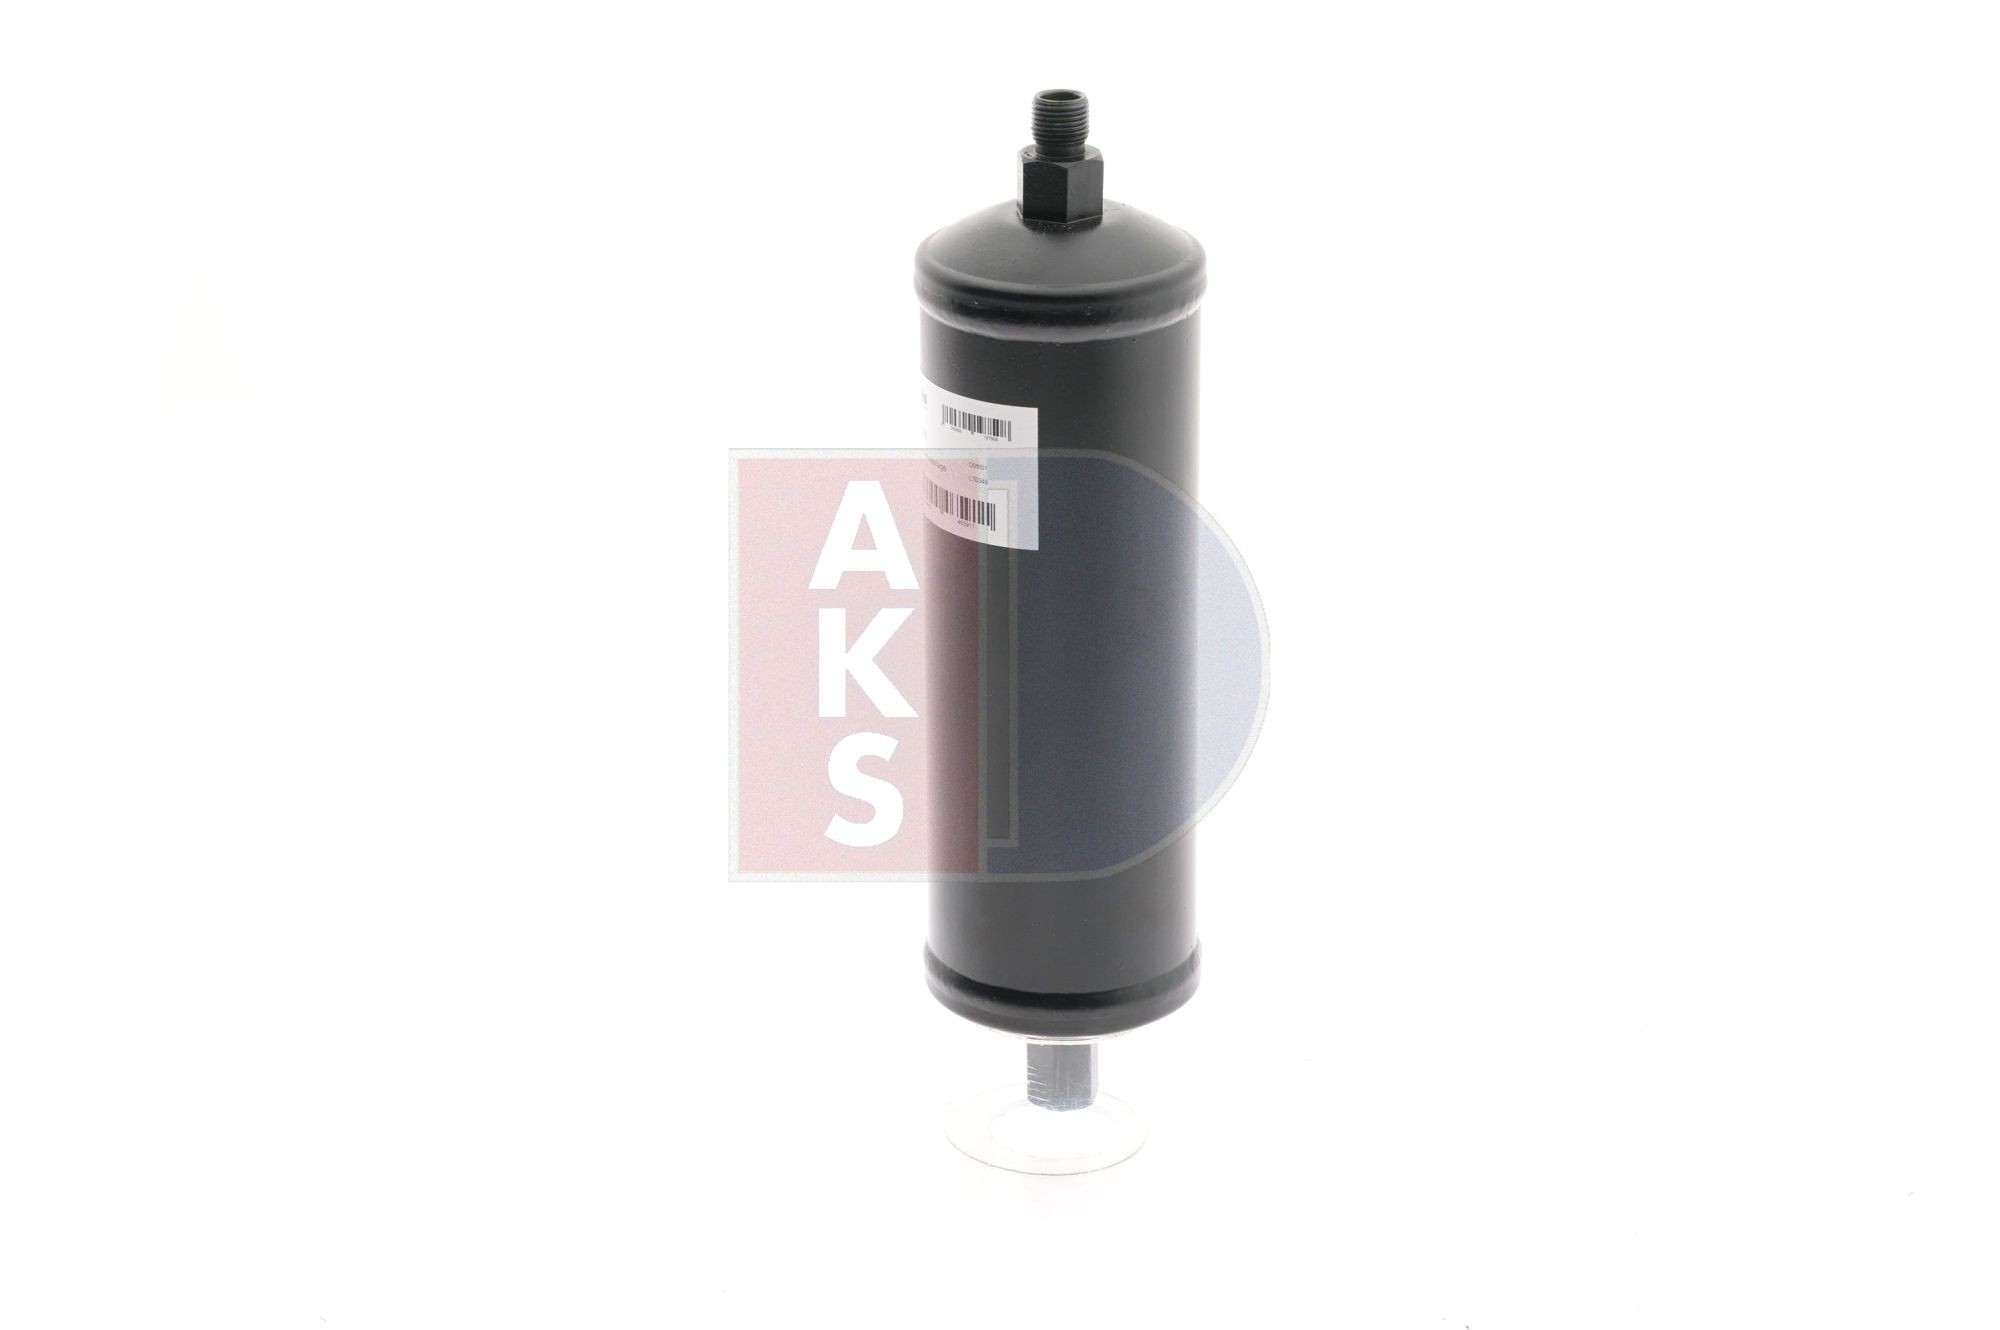 AKS DASIS Air conditioning dryer 800552N – brand-name products at low prices